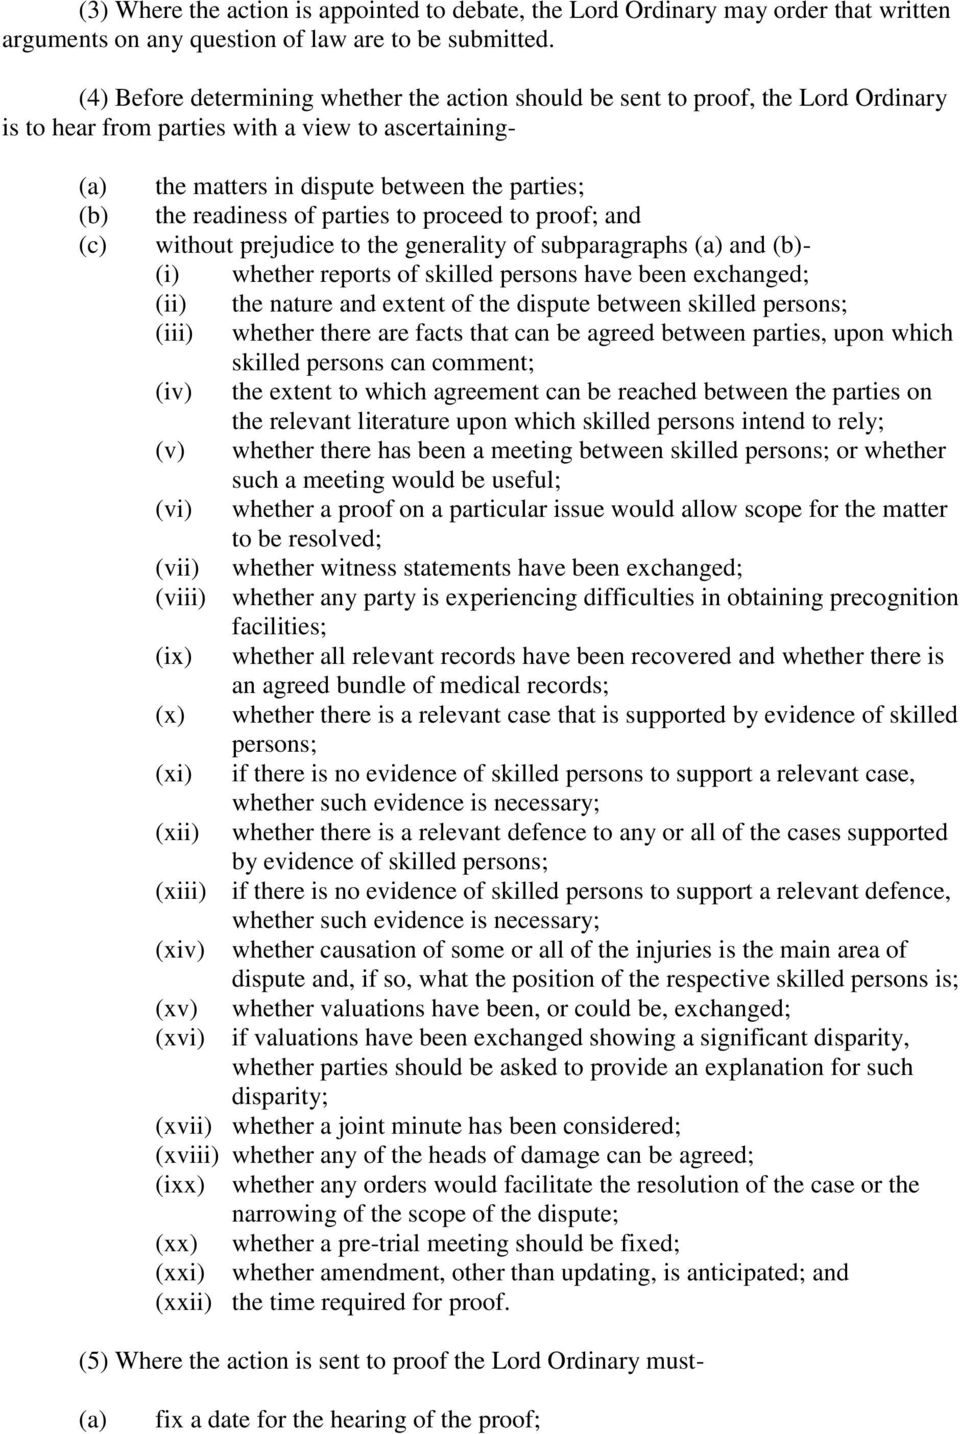 parties to proceed to proof; and without prejudice to the generality of subparagraphs and - (i) whether reports of skilled persons have been exchanged; (ii) the nature and extent of the dispute